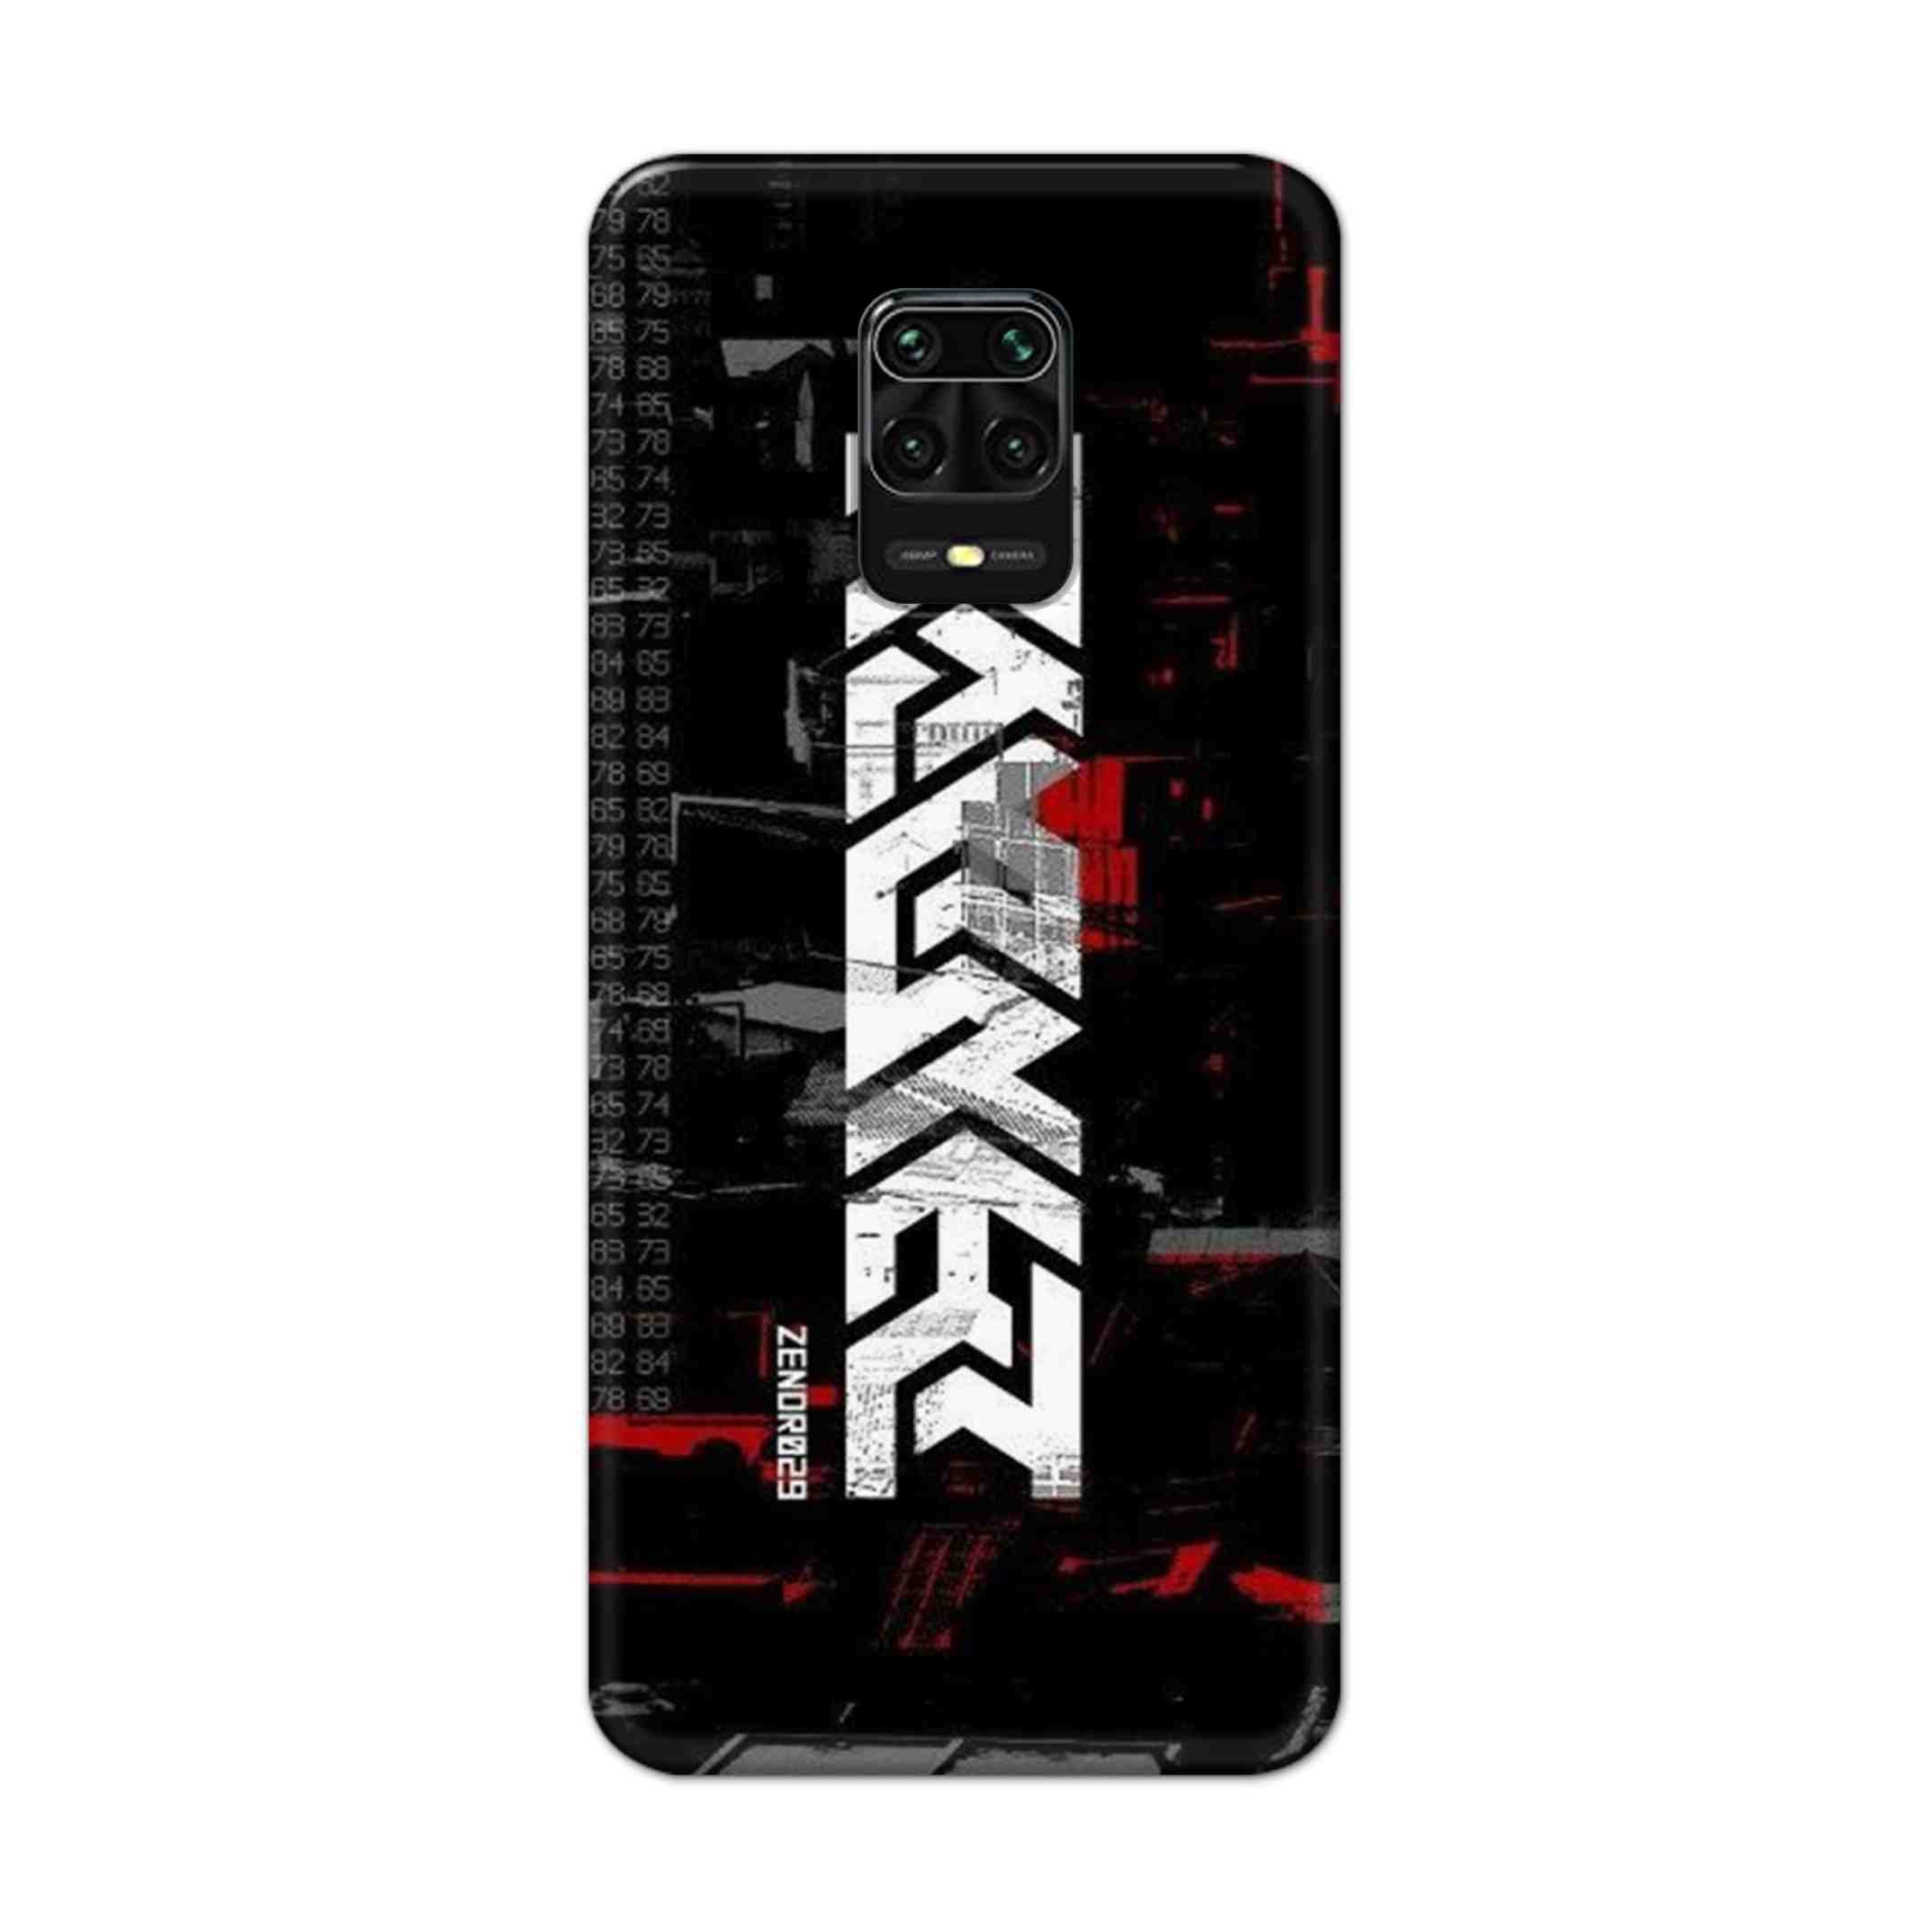 Buy Raxer Hard Back Mobile Phone Case Cover For Redmi Note 9 Pro Online